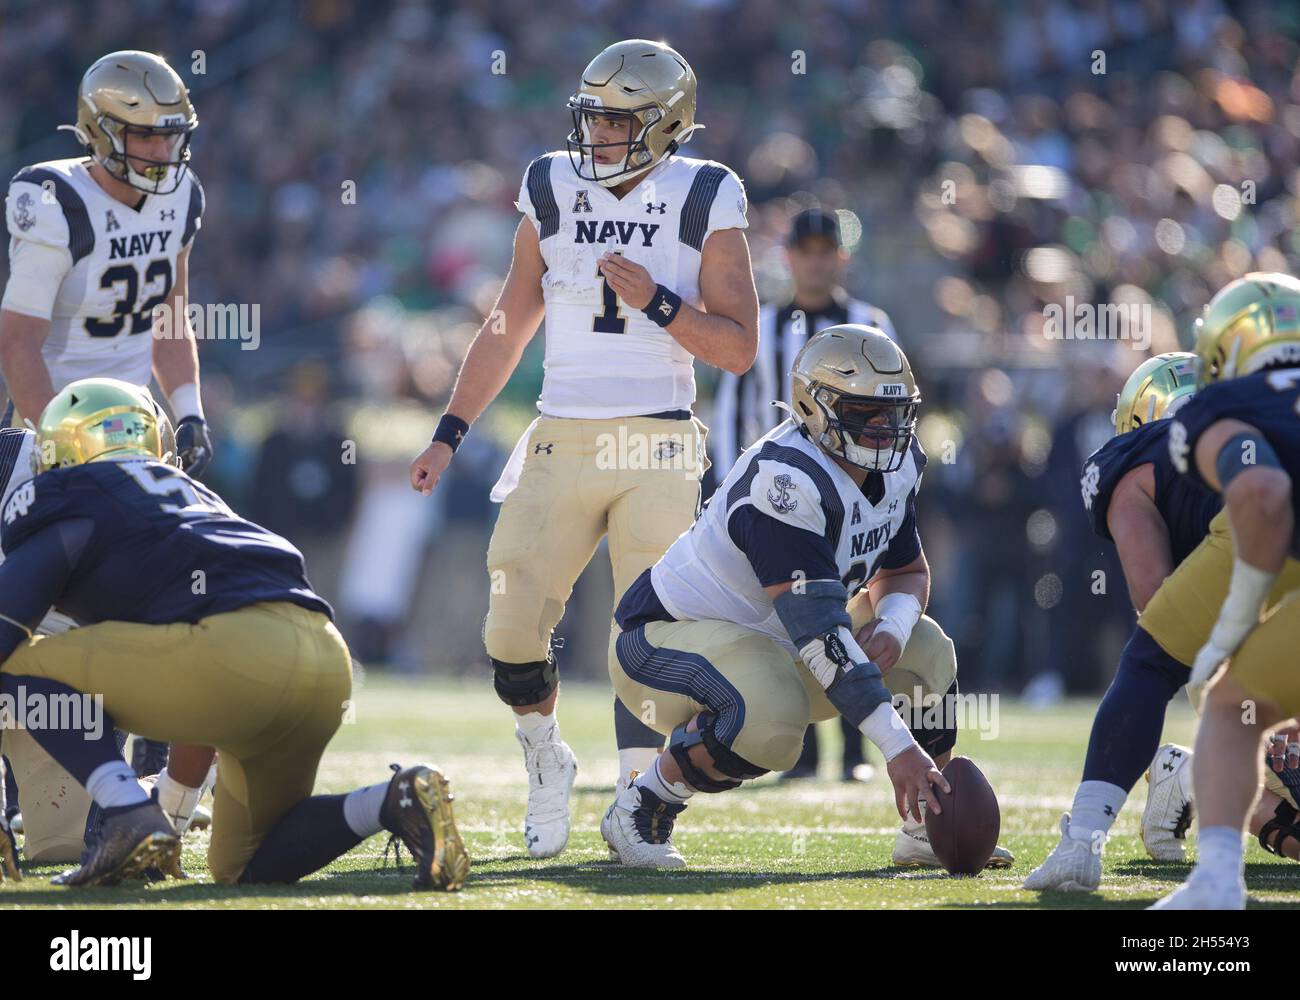 South Bend, Indiana, USA. 06th Nov, 2021. Navy quarterback Tai Lavatai (1) directs the offense during NCAA football game action between the Navy Midshipmen and the Notre Dame Fighting Irish at Notre Dame Stadium in South Bend, Indiana. Notre Dame defeated Navy 34-6. John Mersits/CSM/Alamy Live News Stock Photo